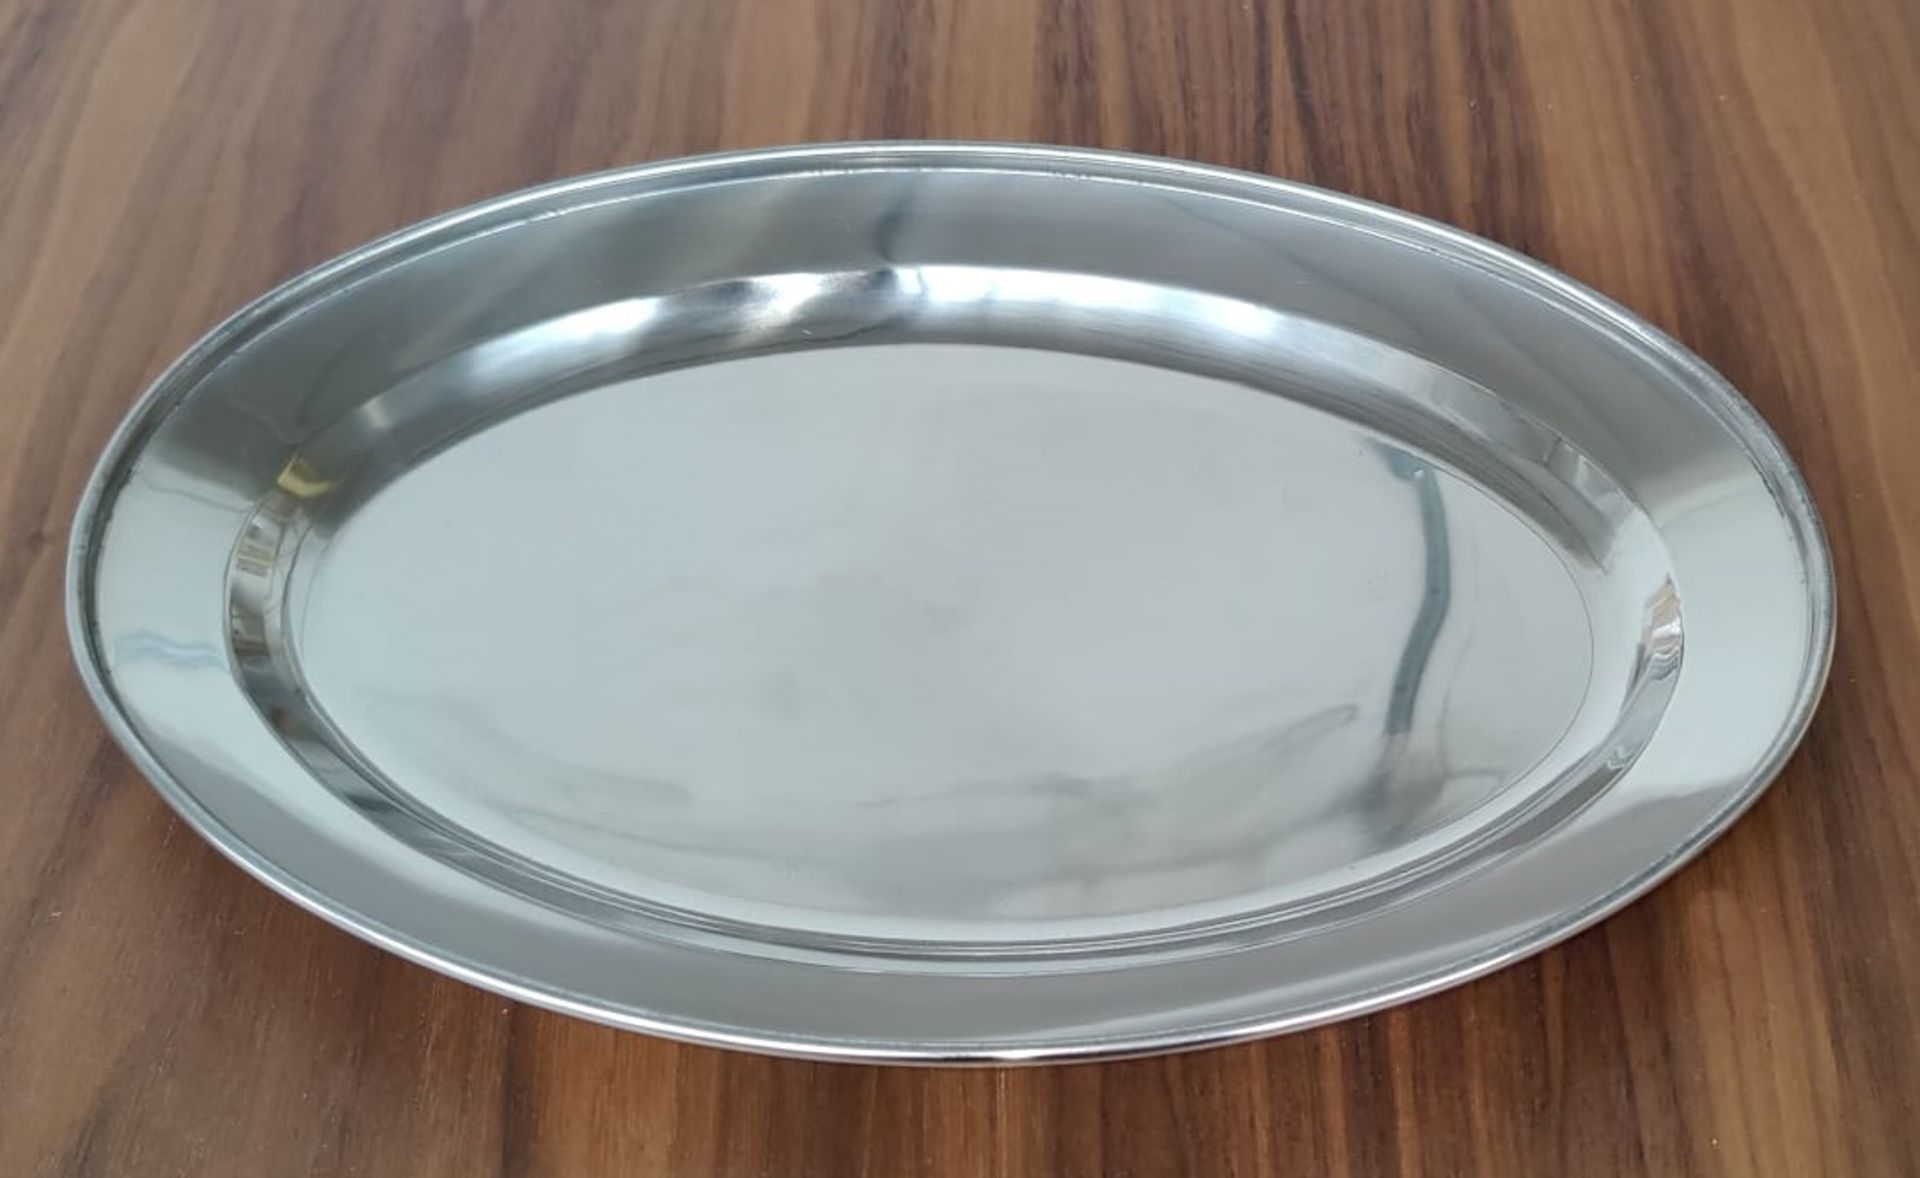 18 x Stainless Steel Small Oval Service Trays - Size: 255mm x 180mm - Brand New Boxed Stock RRP £90 - Image 3 of 7